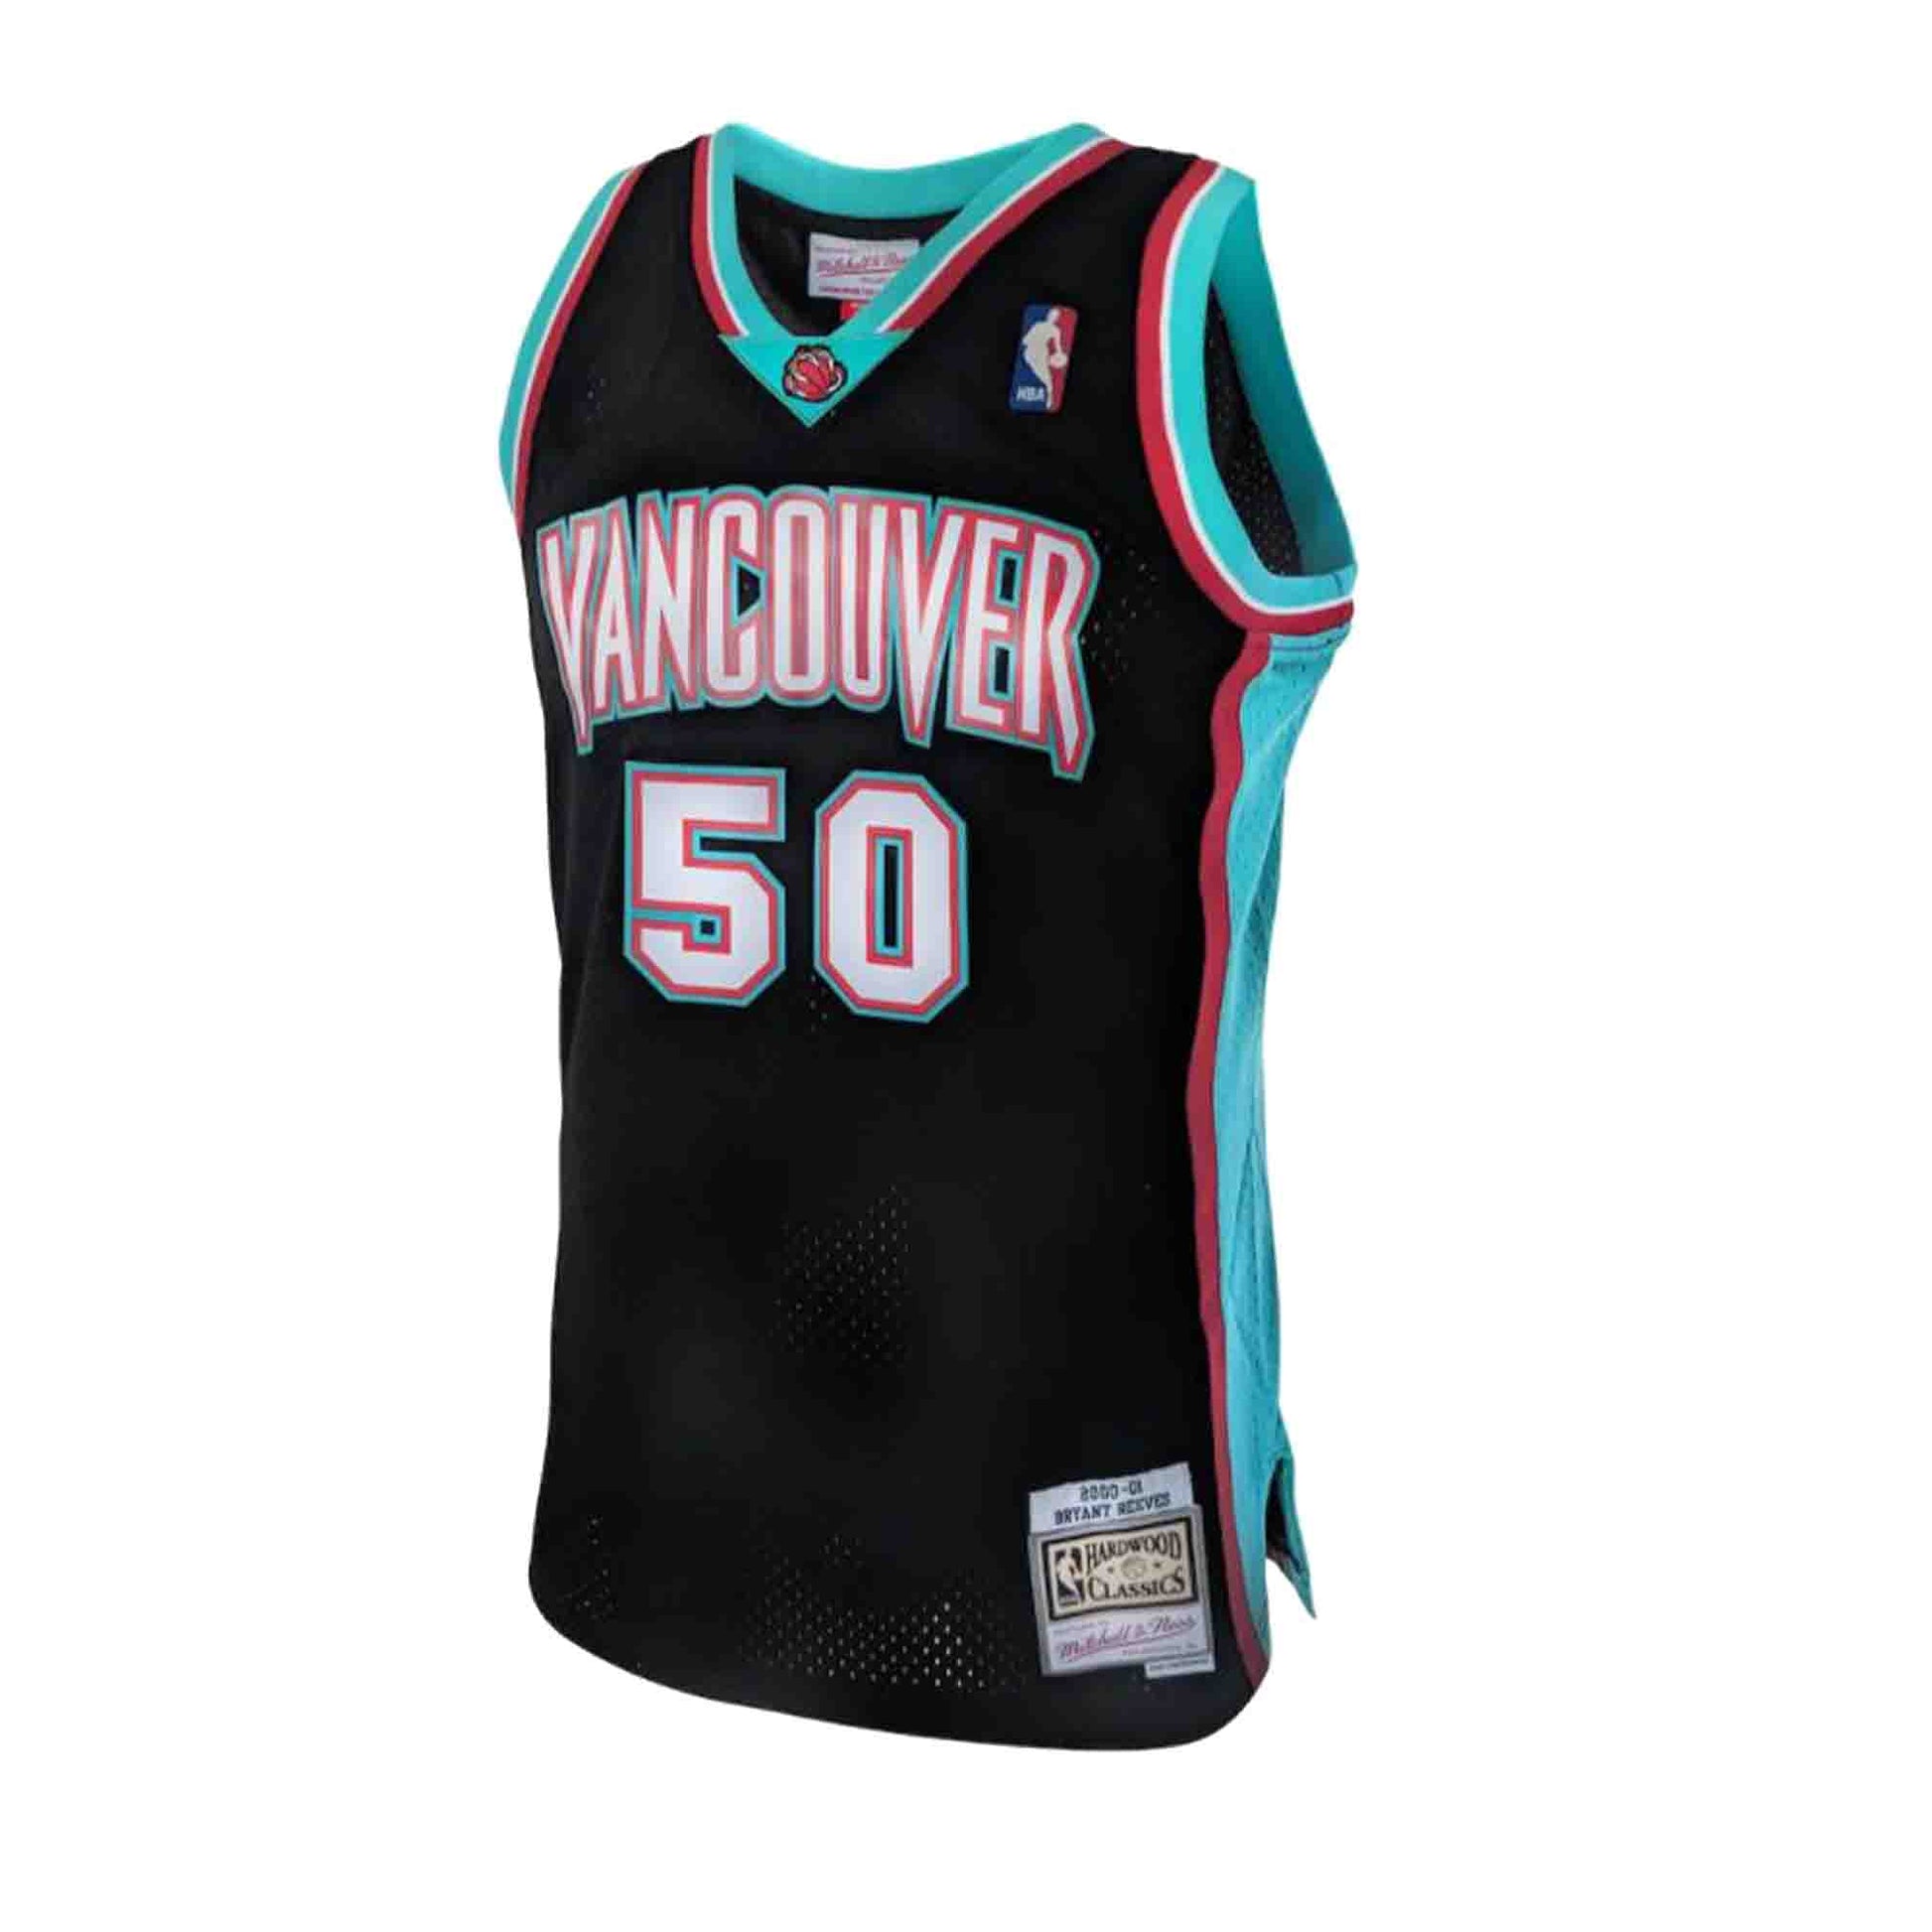 Mitchell & Ness Swingman Jersey Vancouver Grizzlies 1995-96 Bryant Reeves